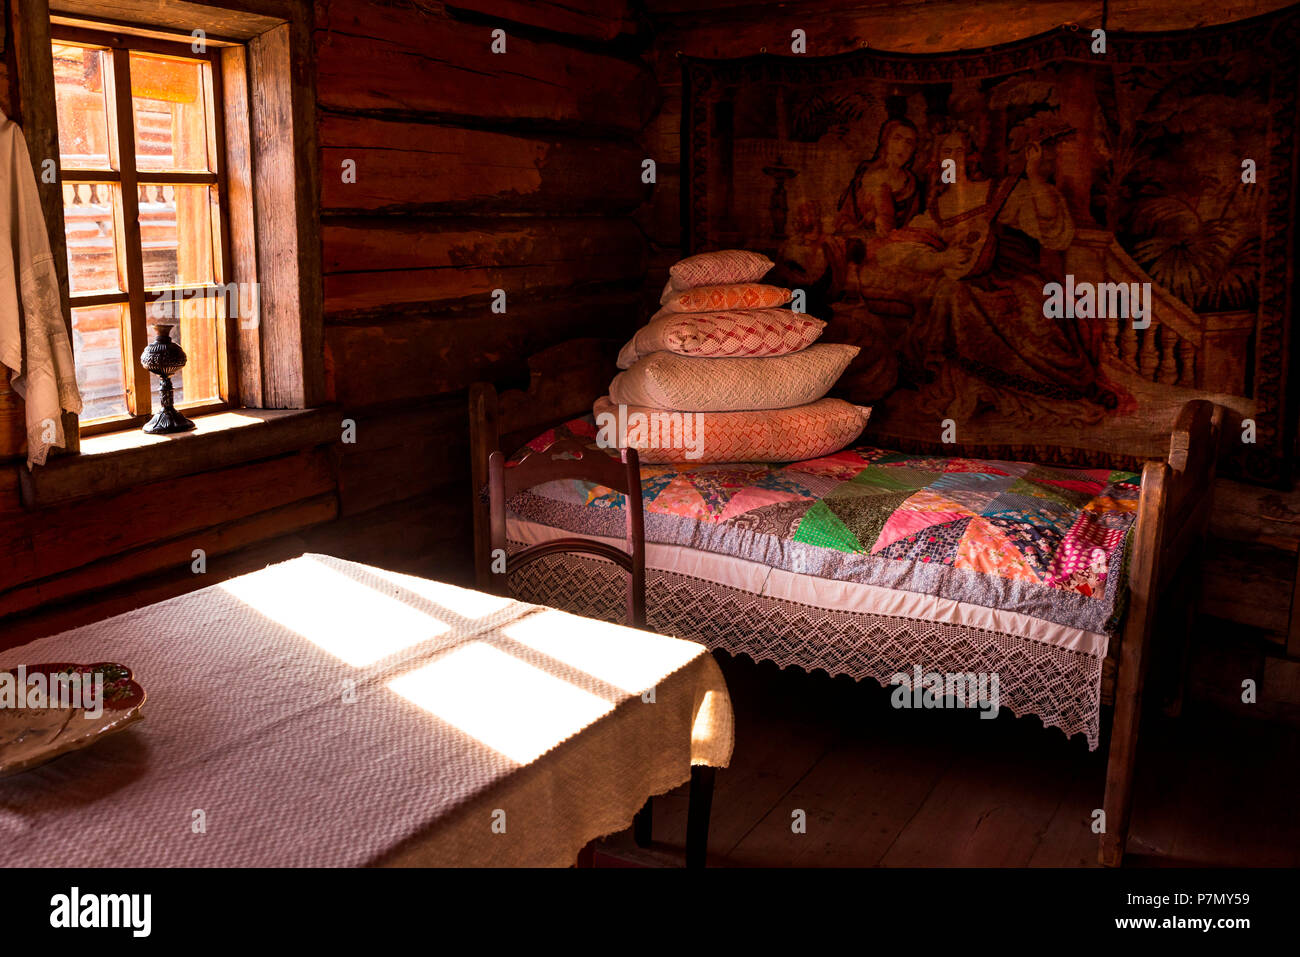 Reproduction of old traditional house in Russia, Taltsy Irkutsk region, Siberia, Russia Stock Photo